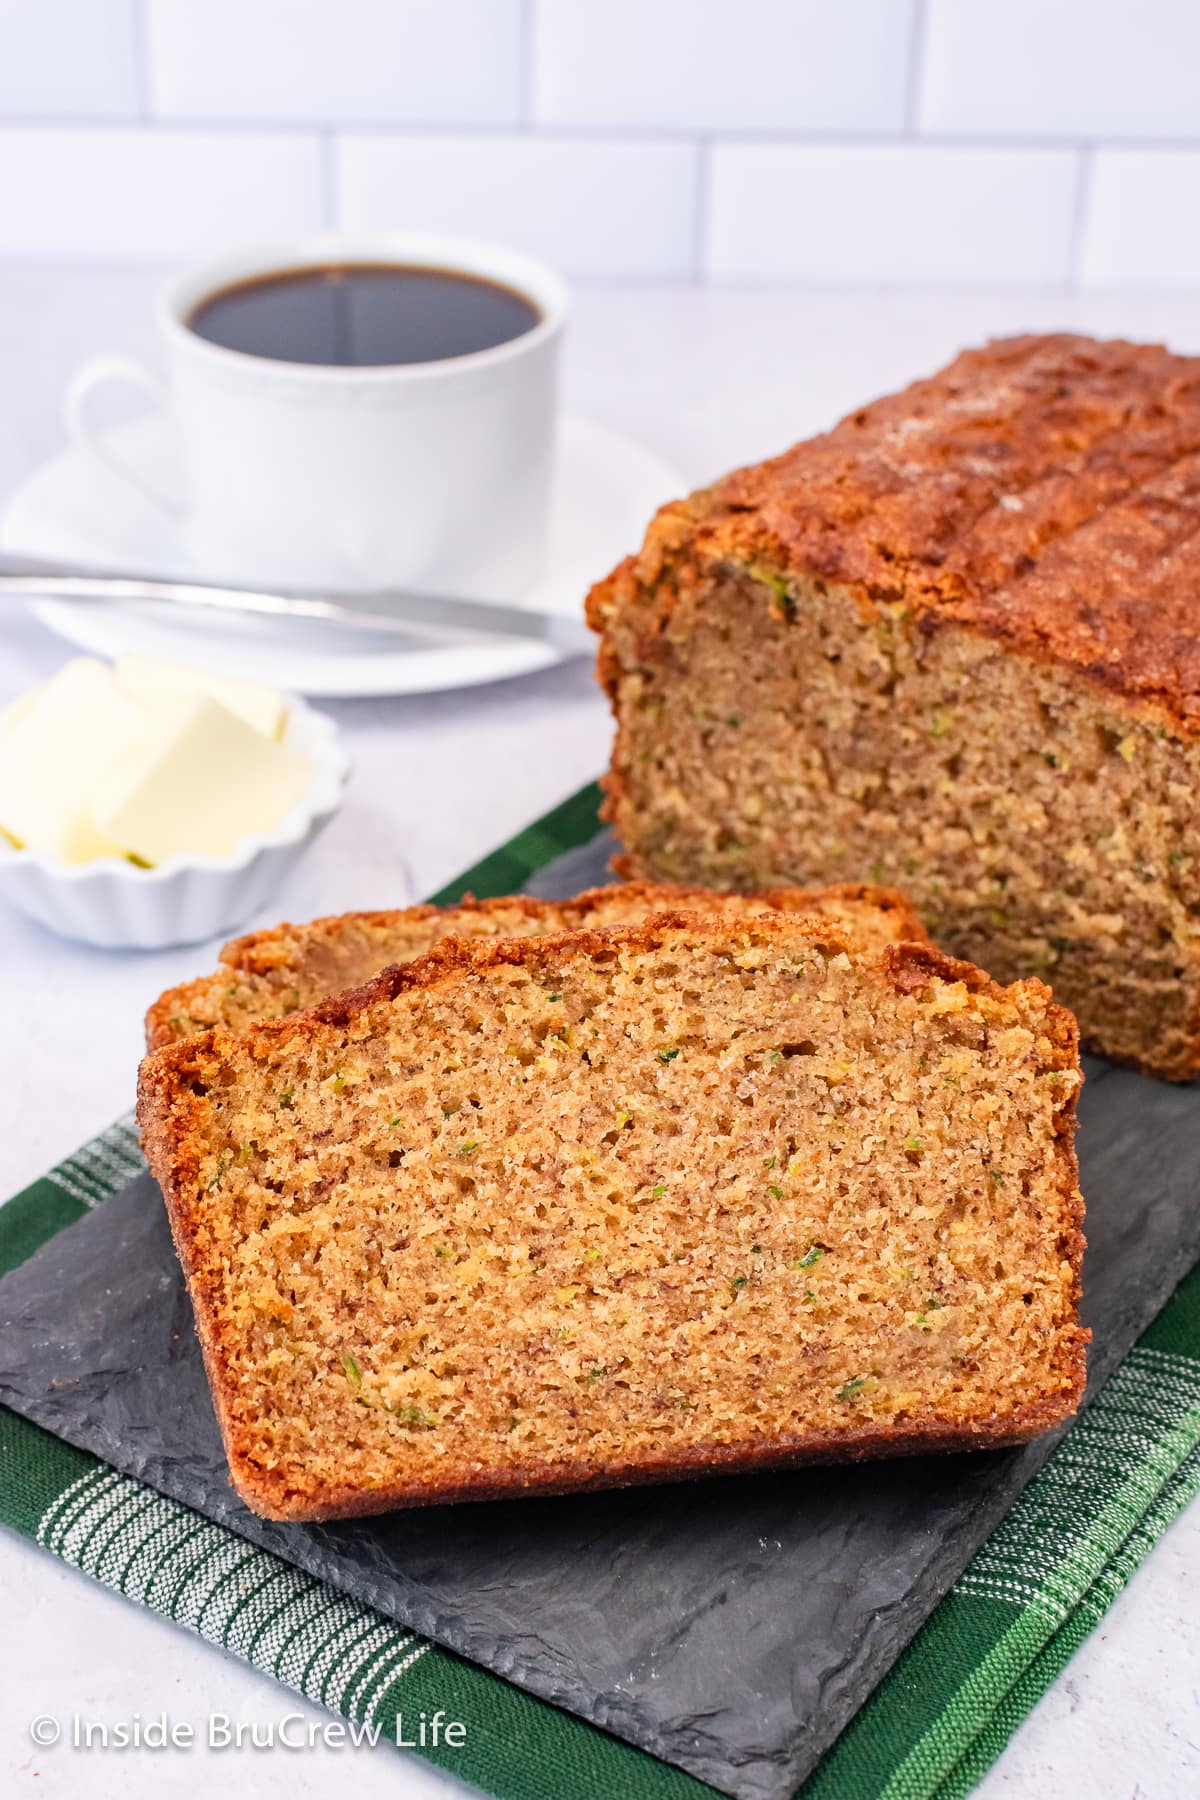 A loaf of zucchini bread with two slices lying beside it.